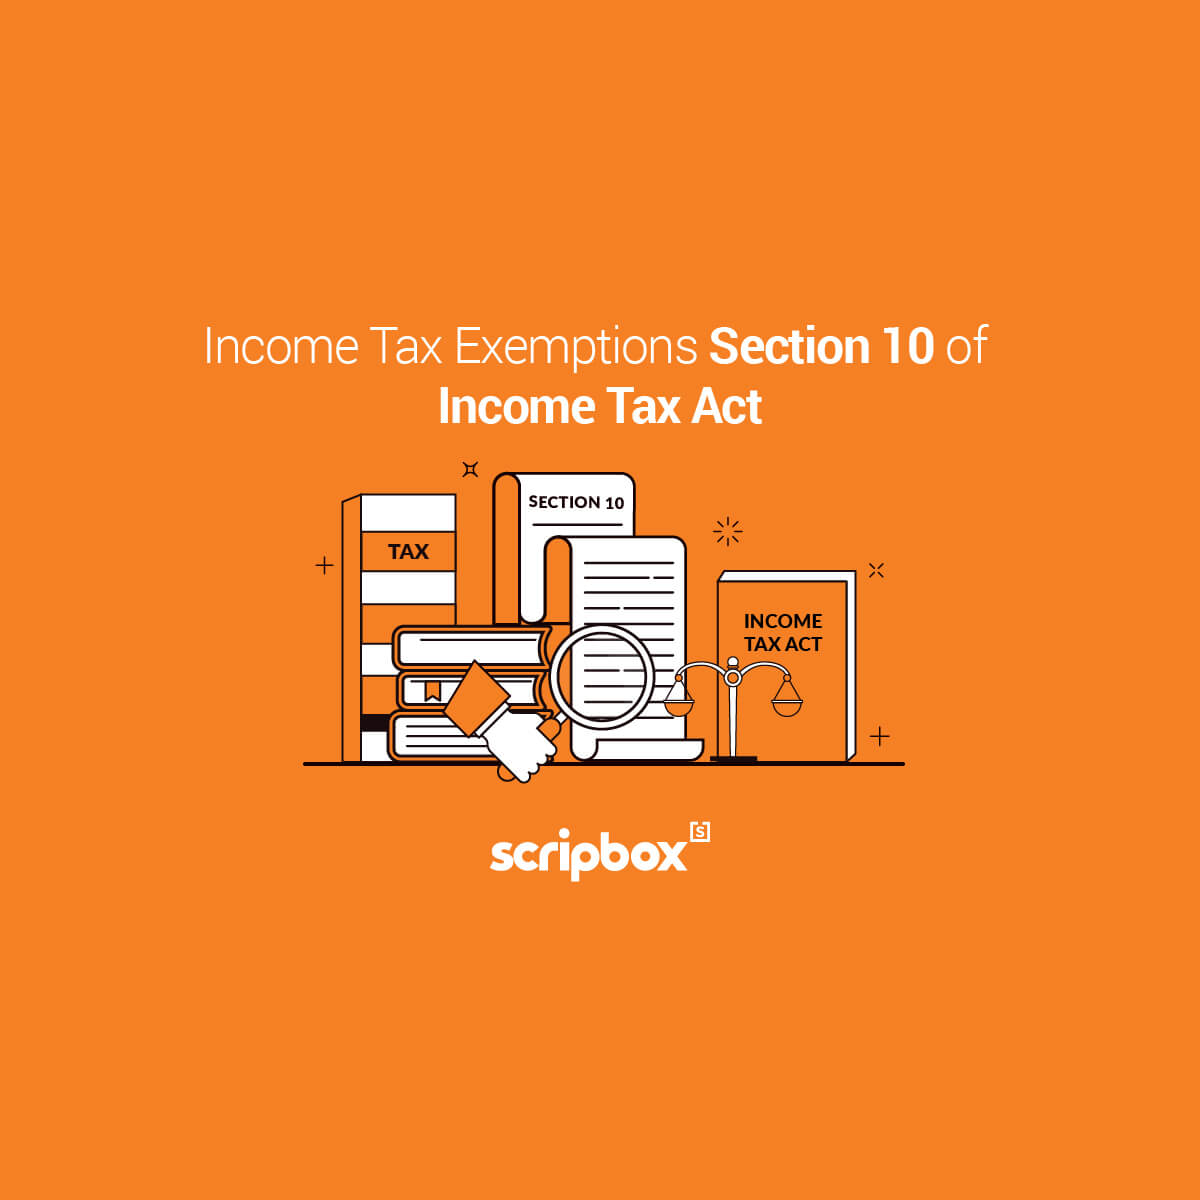 section 10 of income tax act